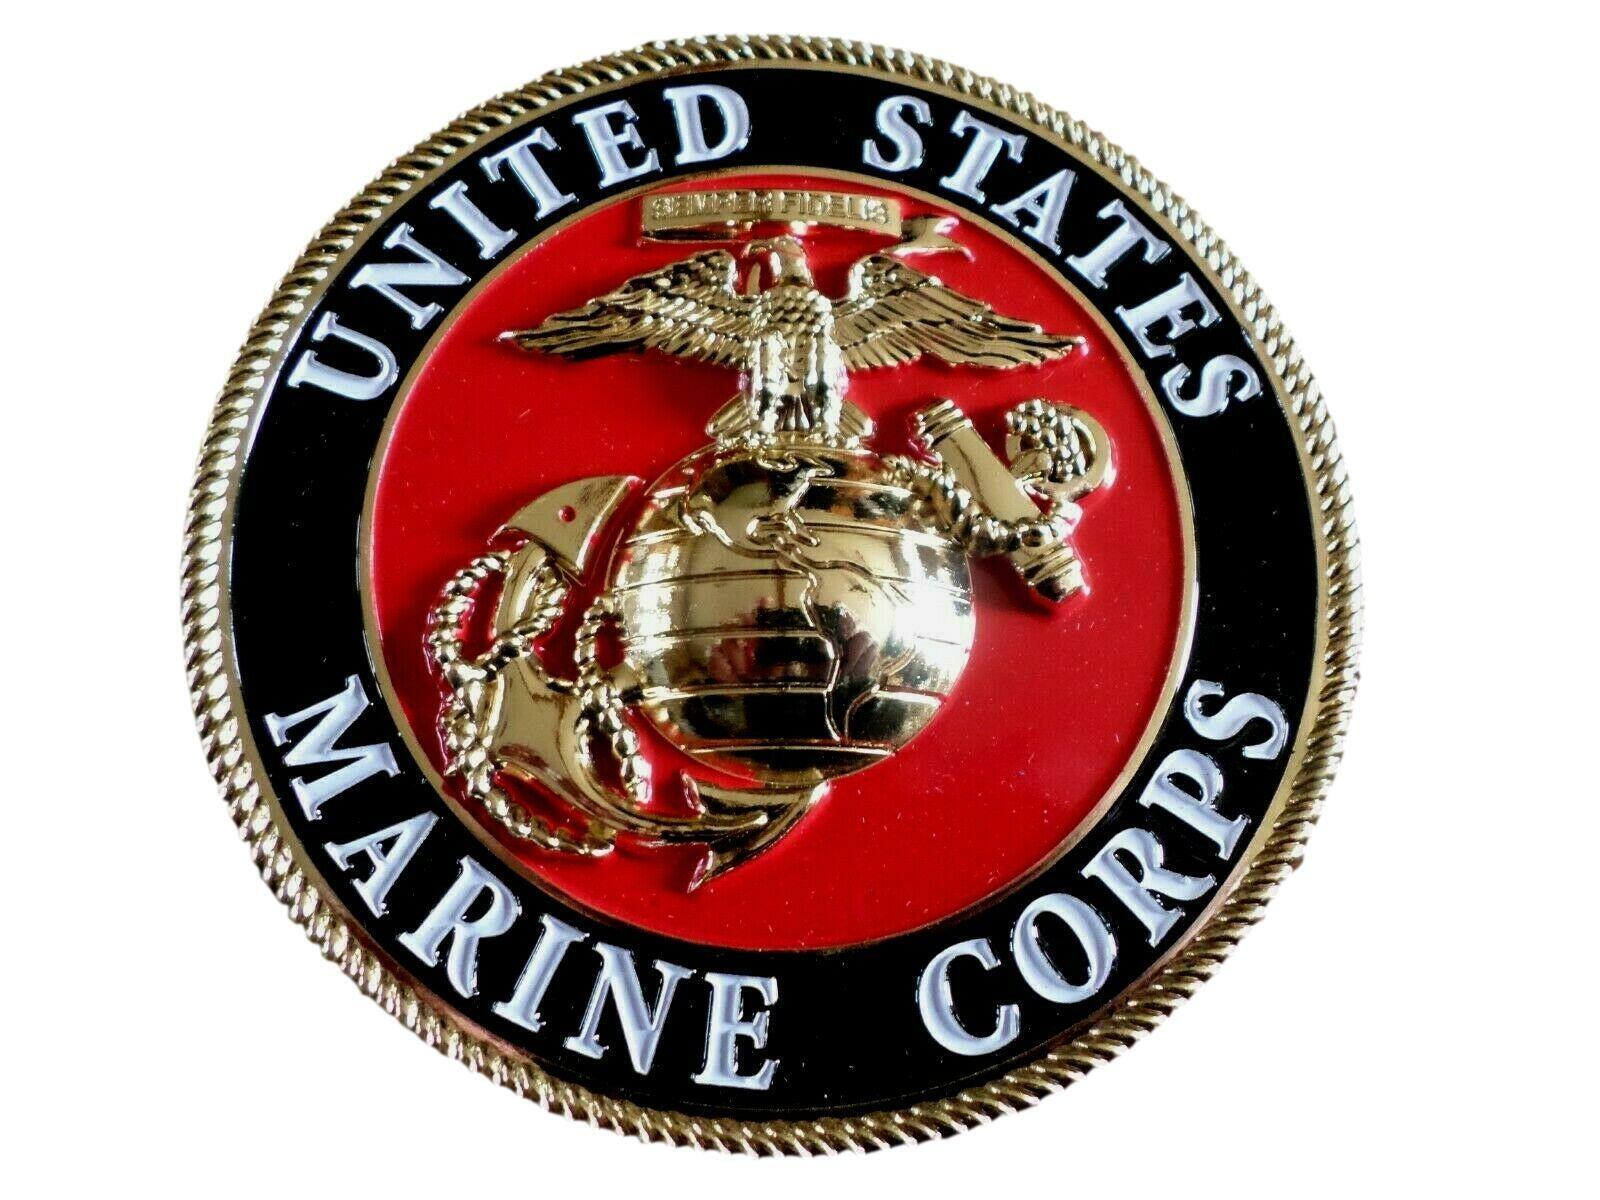 Officially Licensed USMC Leather Ega Patch - Full Color